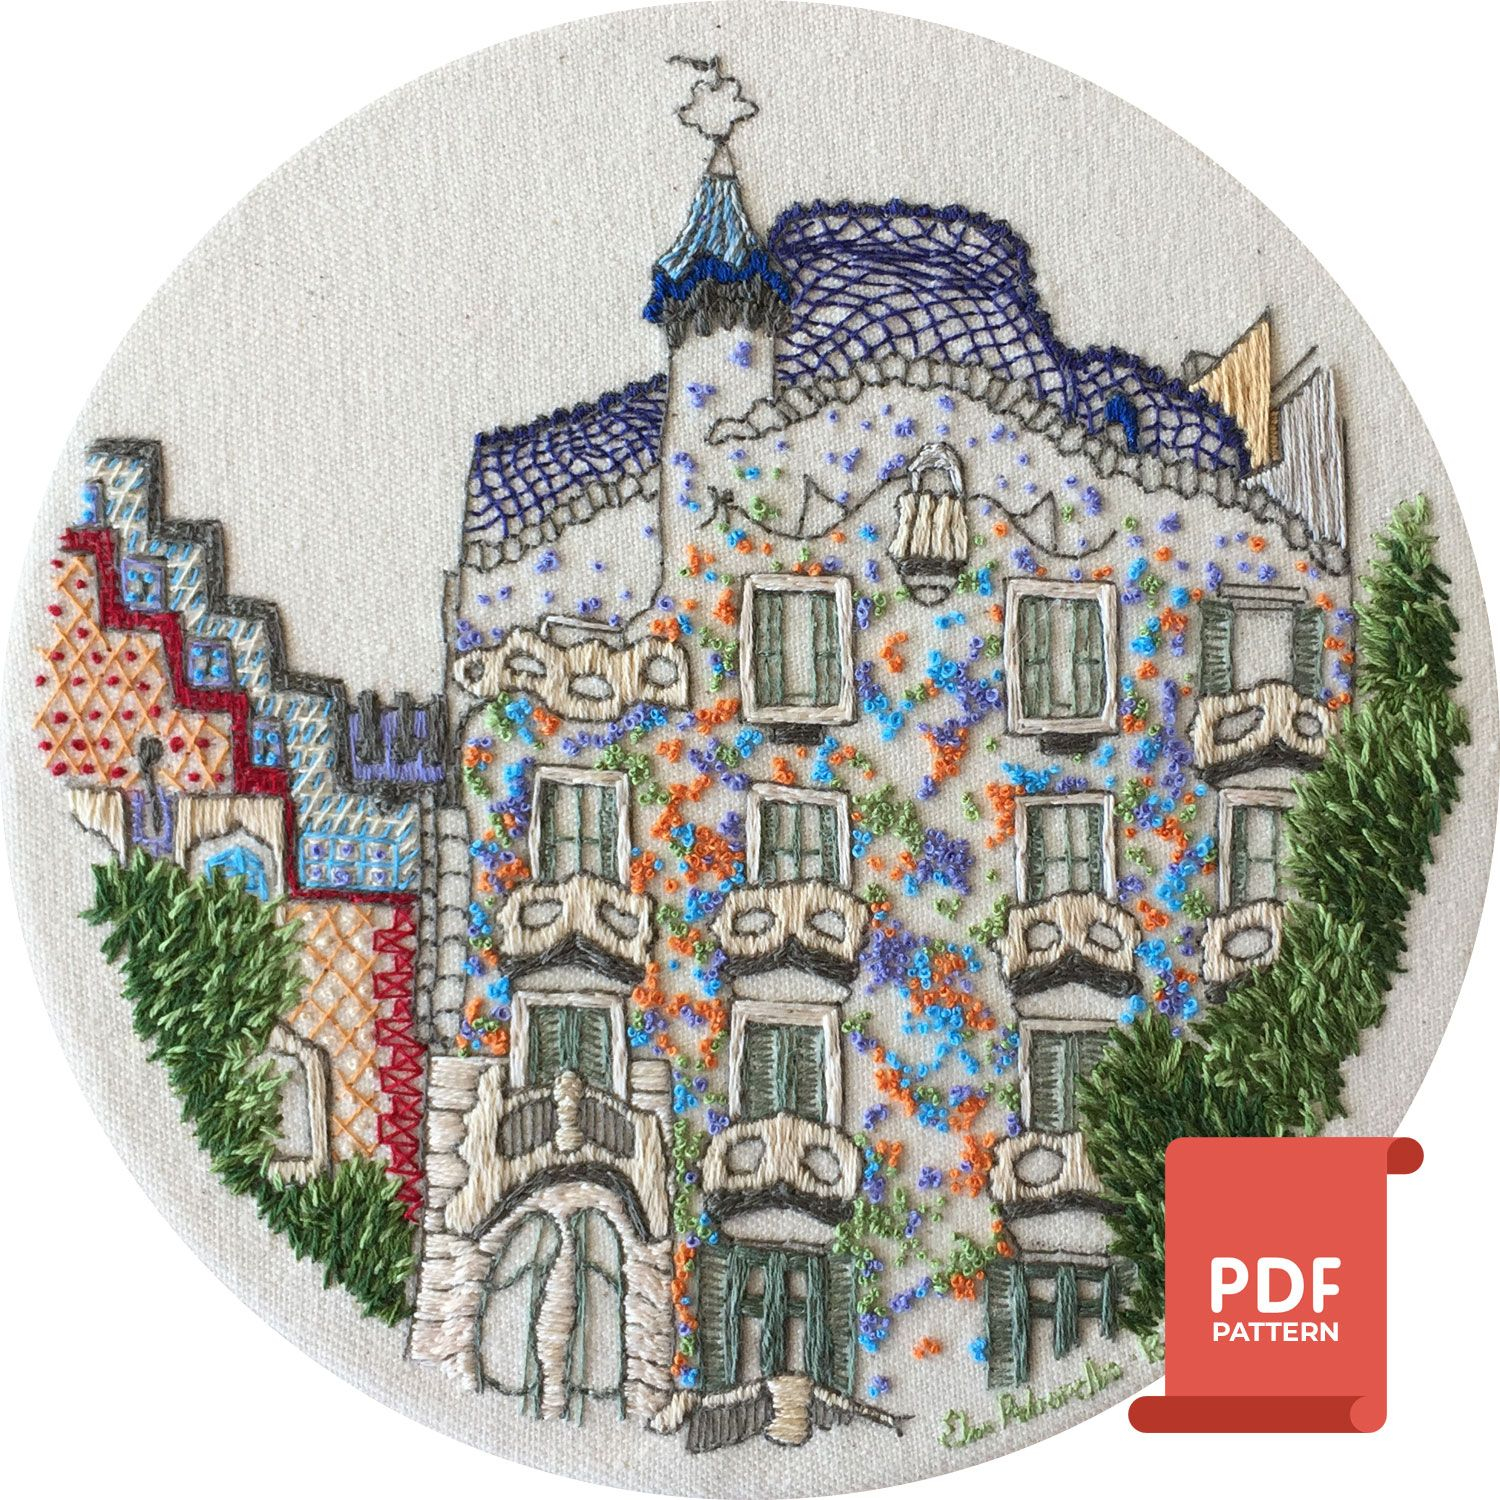 French Knot Embroidery Patterns French Knot Pattern Of Casa Battlo Hand Embroidery